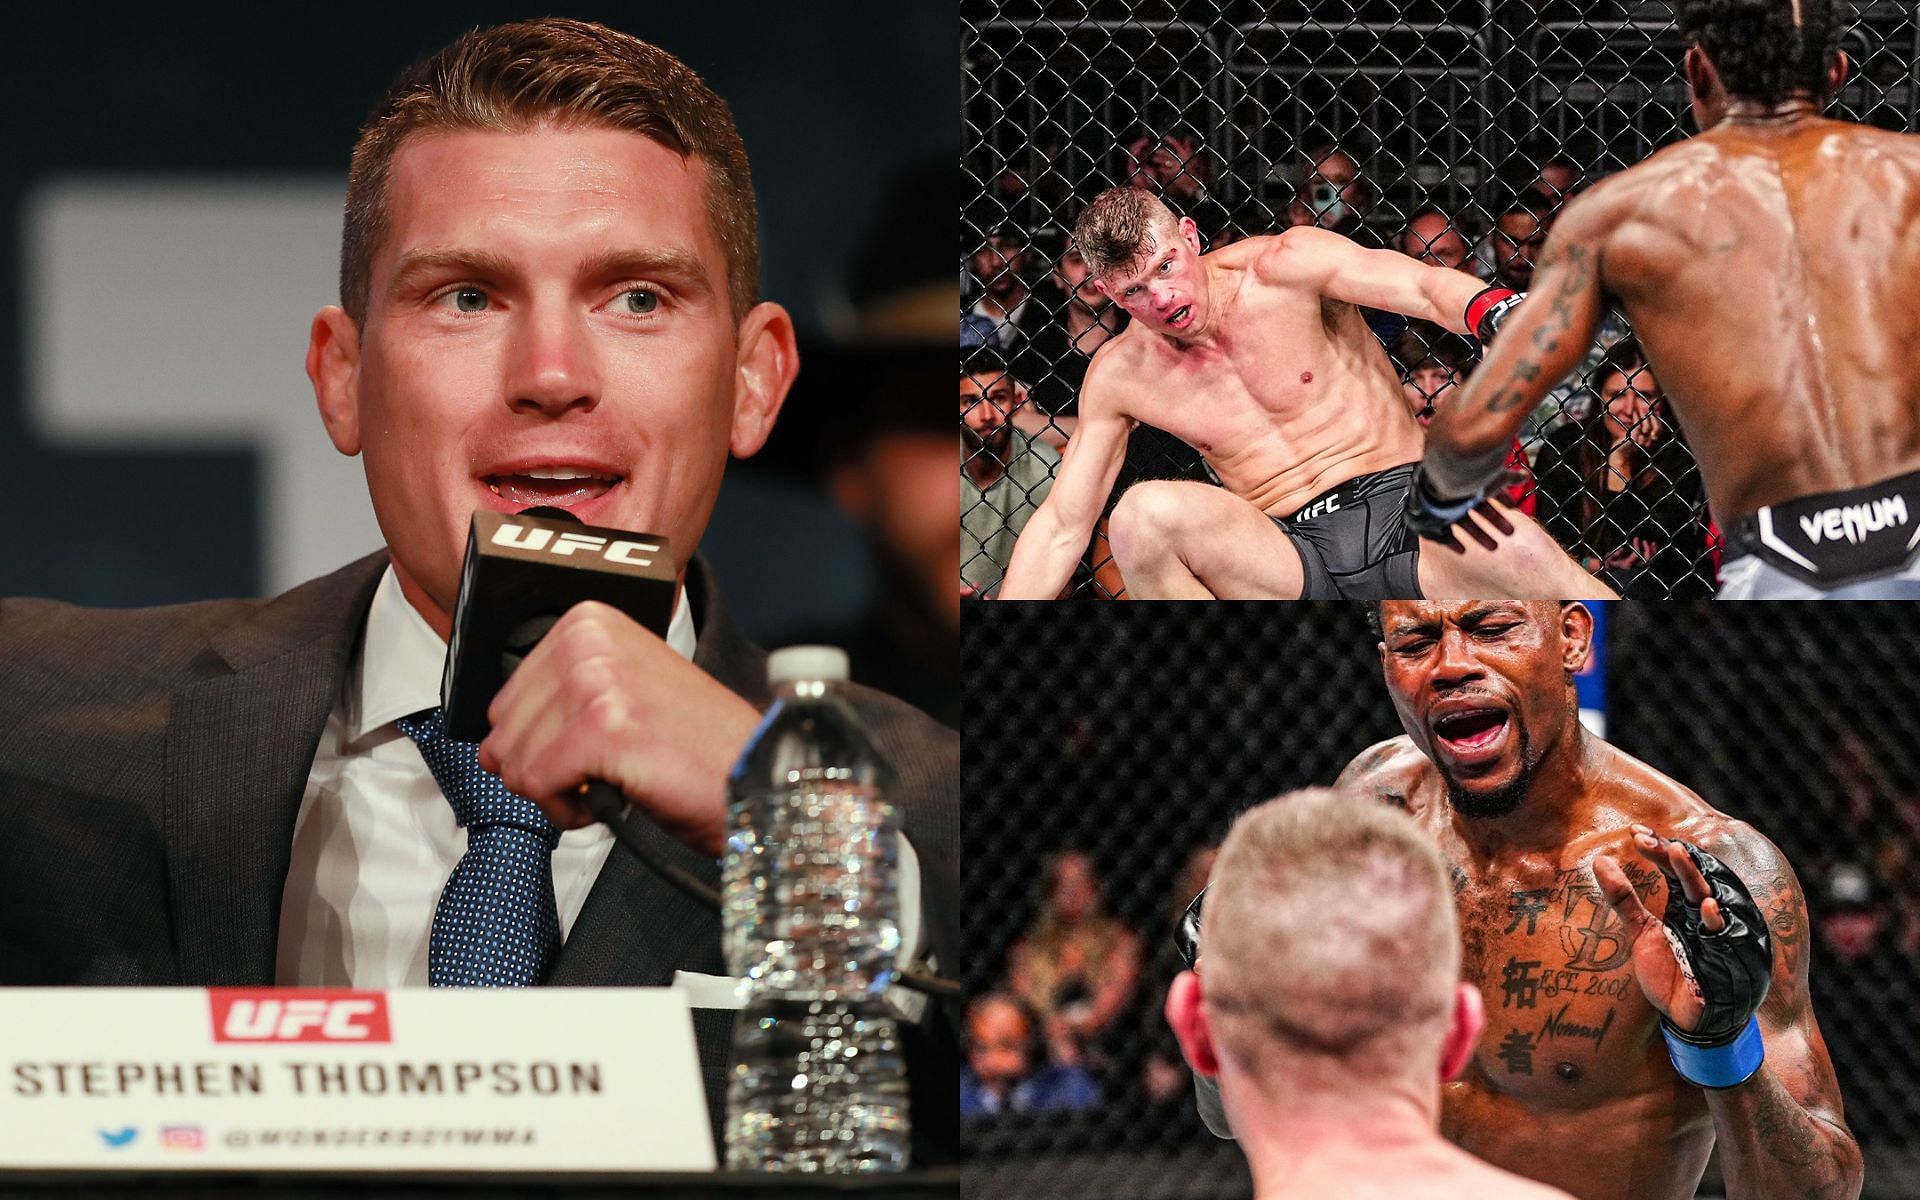 Stephen Thompson (Left); Thompson after getting wobbled in the orthodox stance (Top Right); Thompson fighting in the southpaw stance (Bottom Right) [Image courtesy: left image via Getty Images; top and bottom right images via @espnmma Instagram]